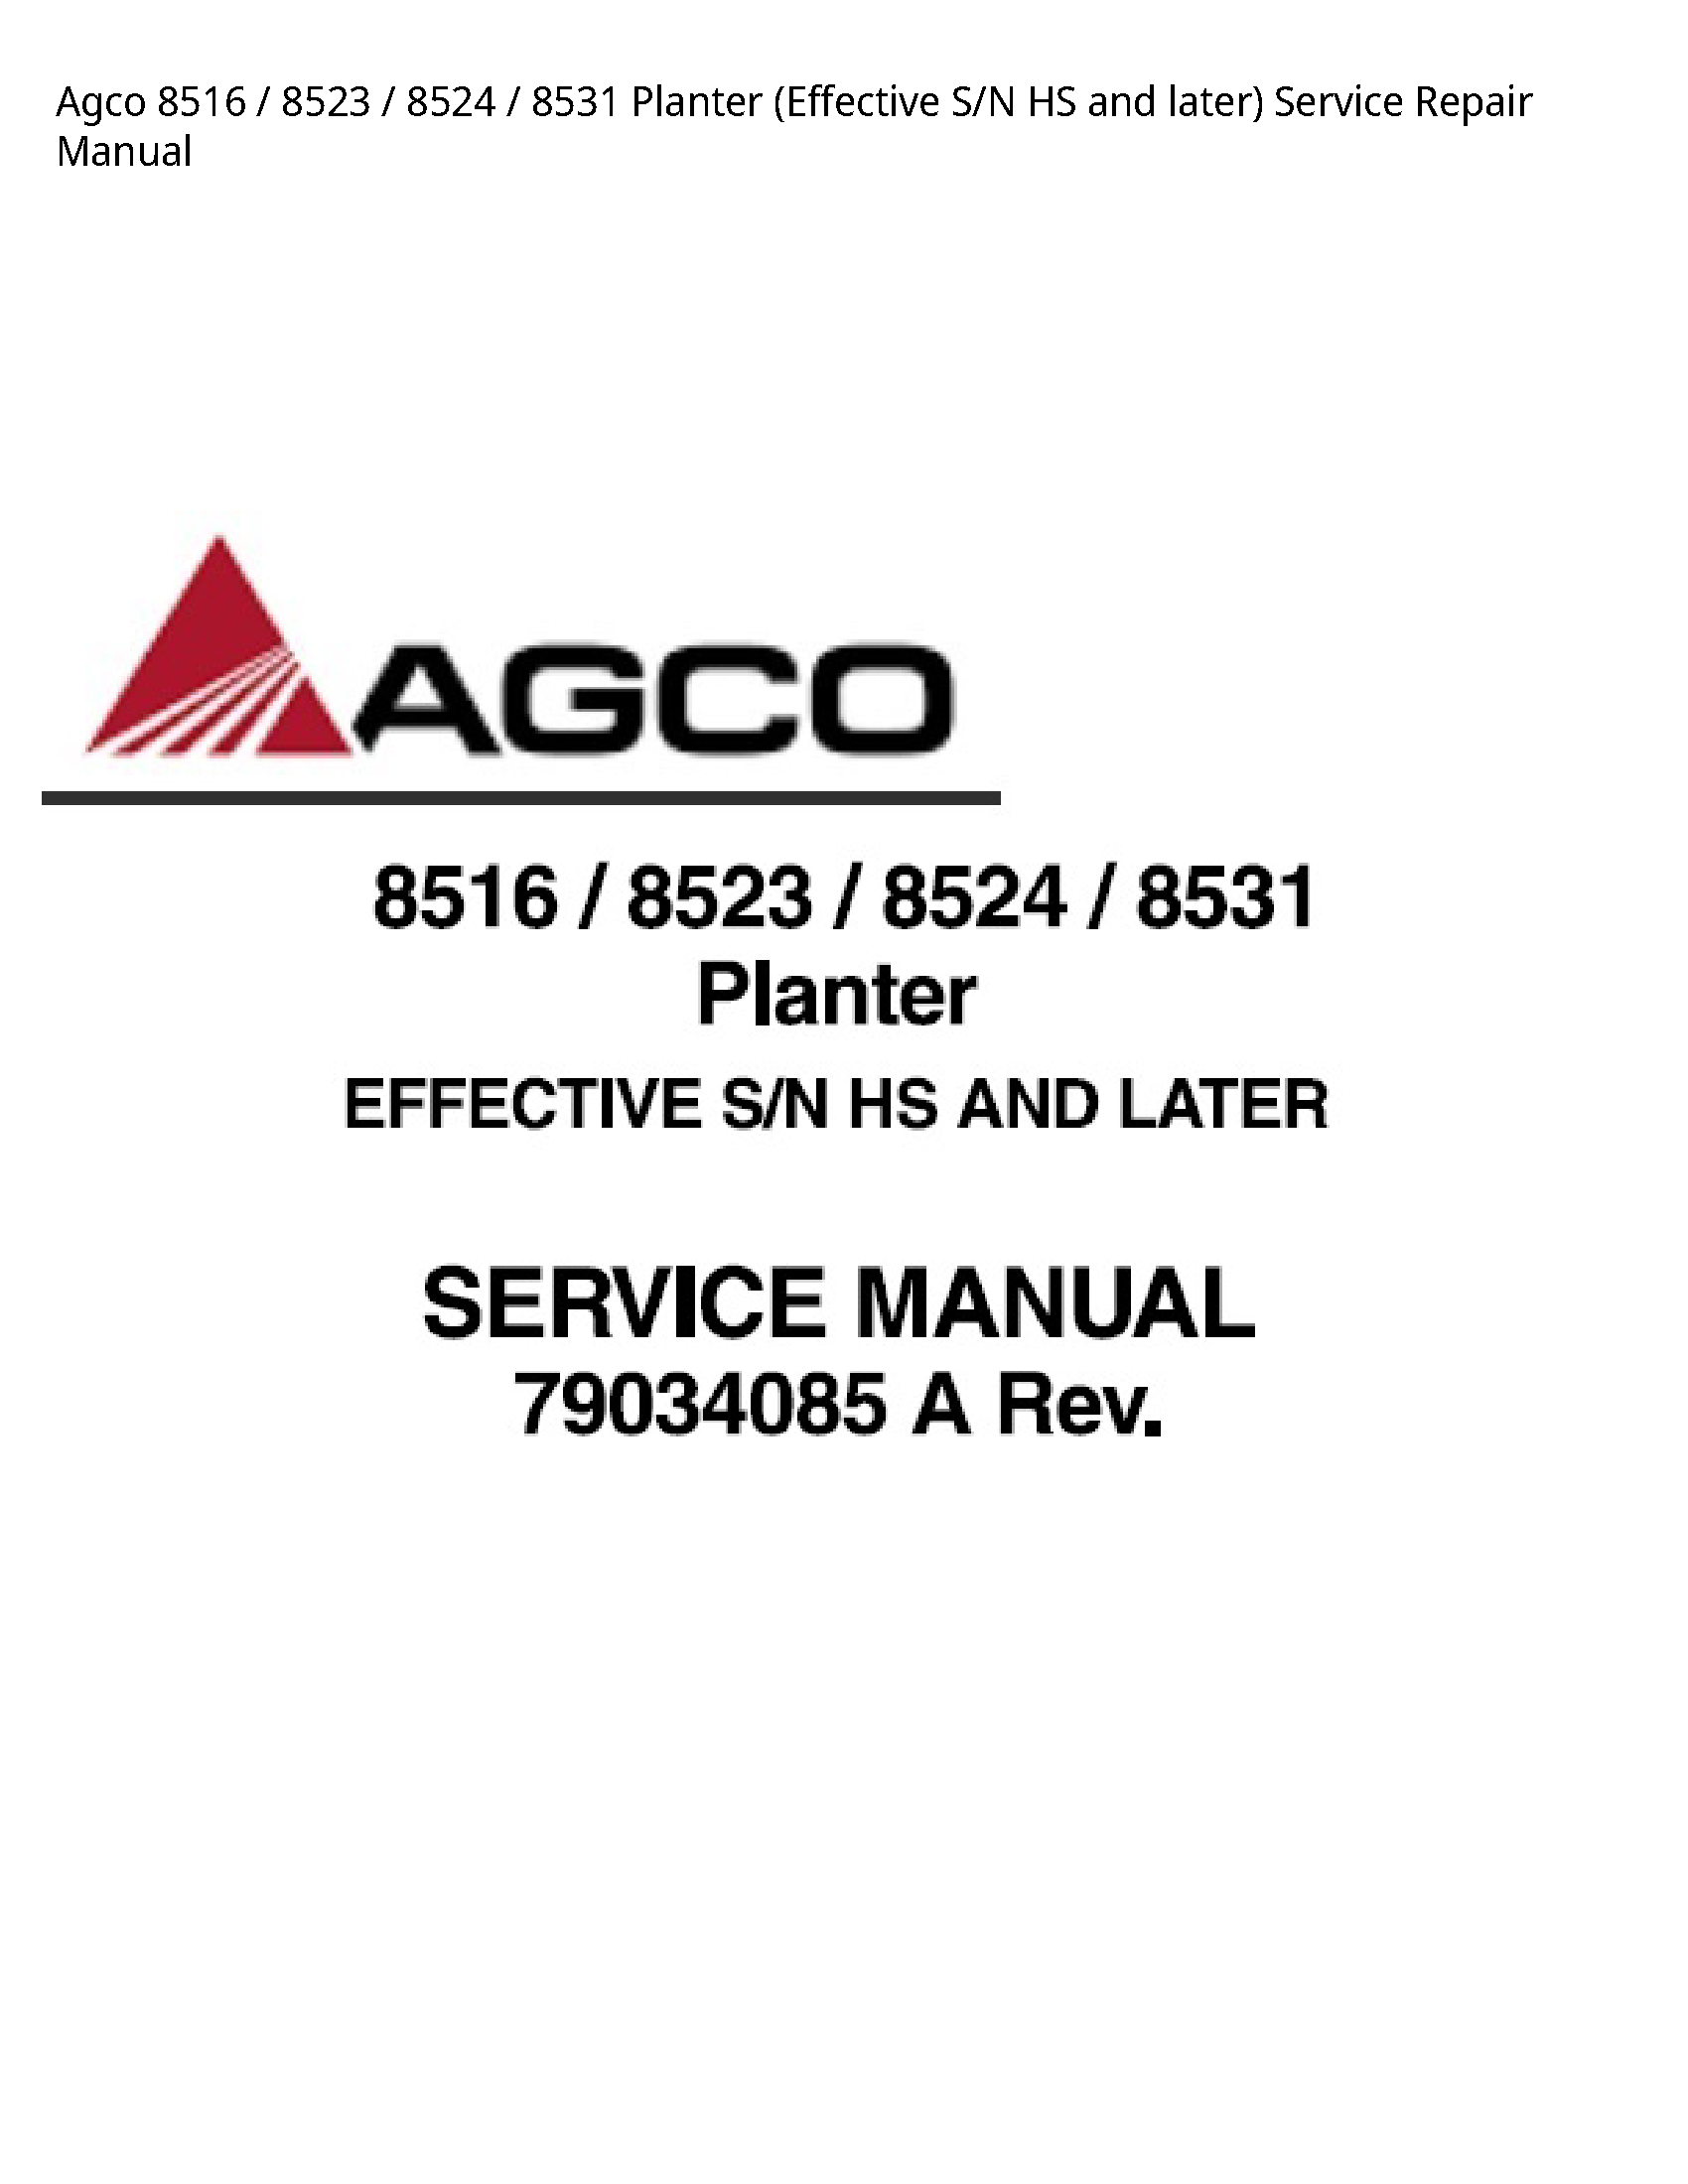 AGCO 8516 Planter (Effective S/N HS  later) manual